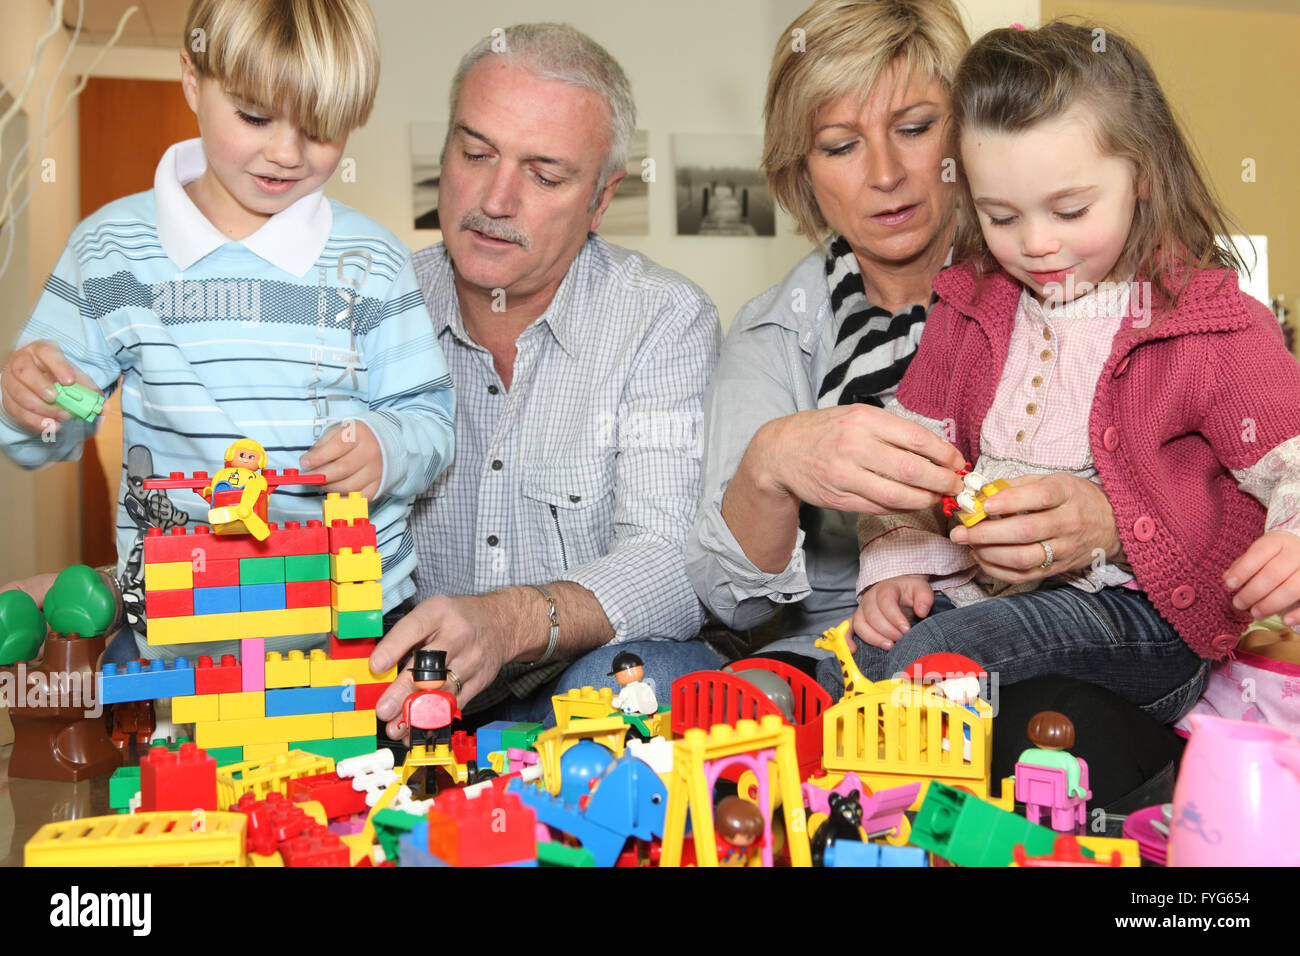 Grandparents and grandchildren playing together Stock Photo